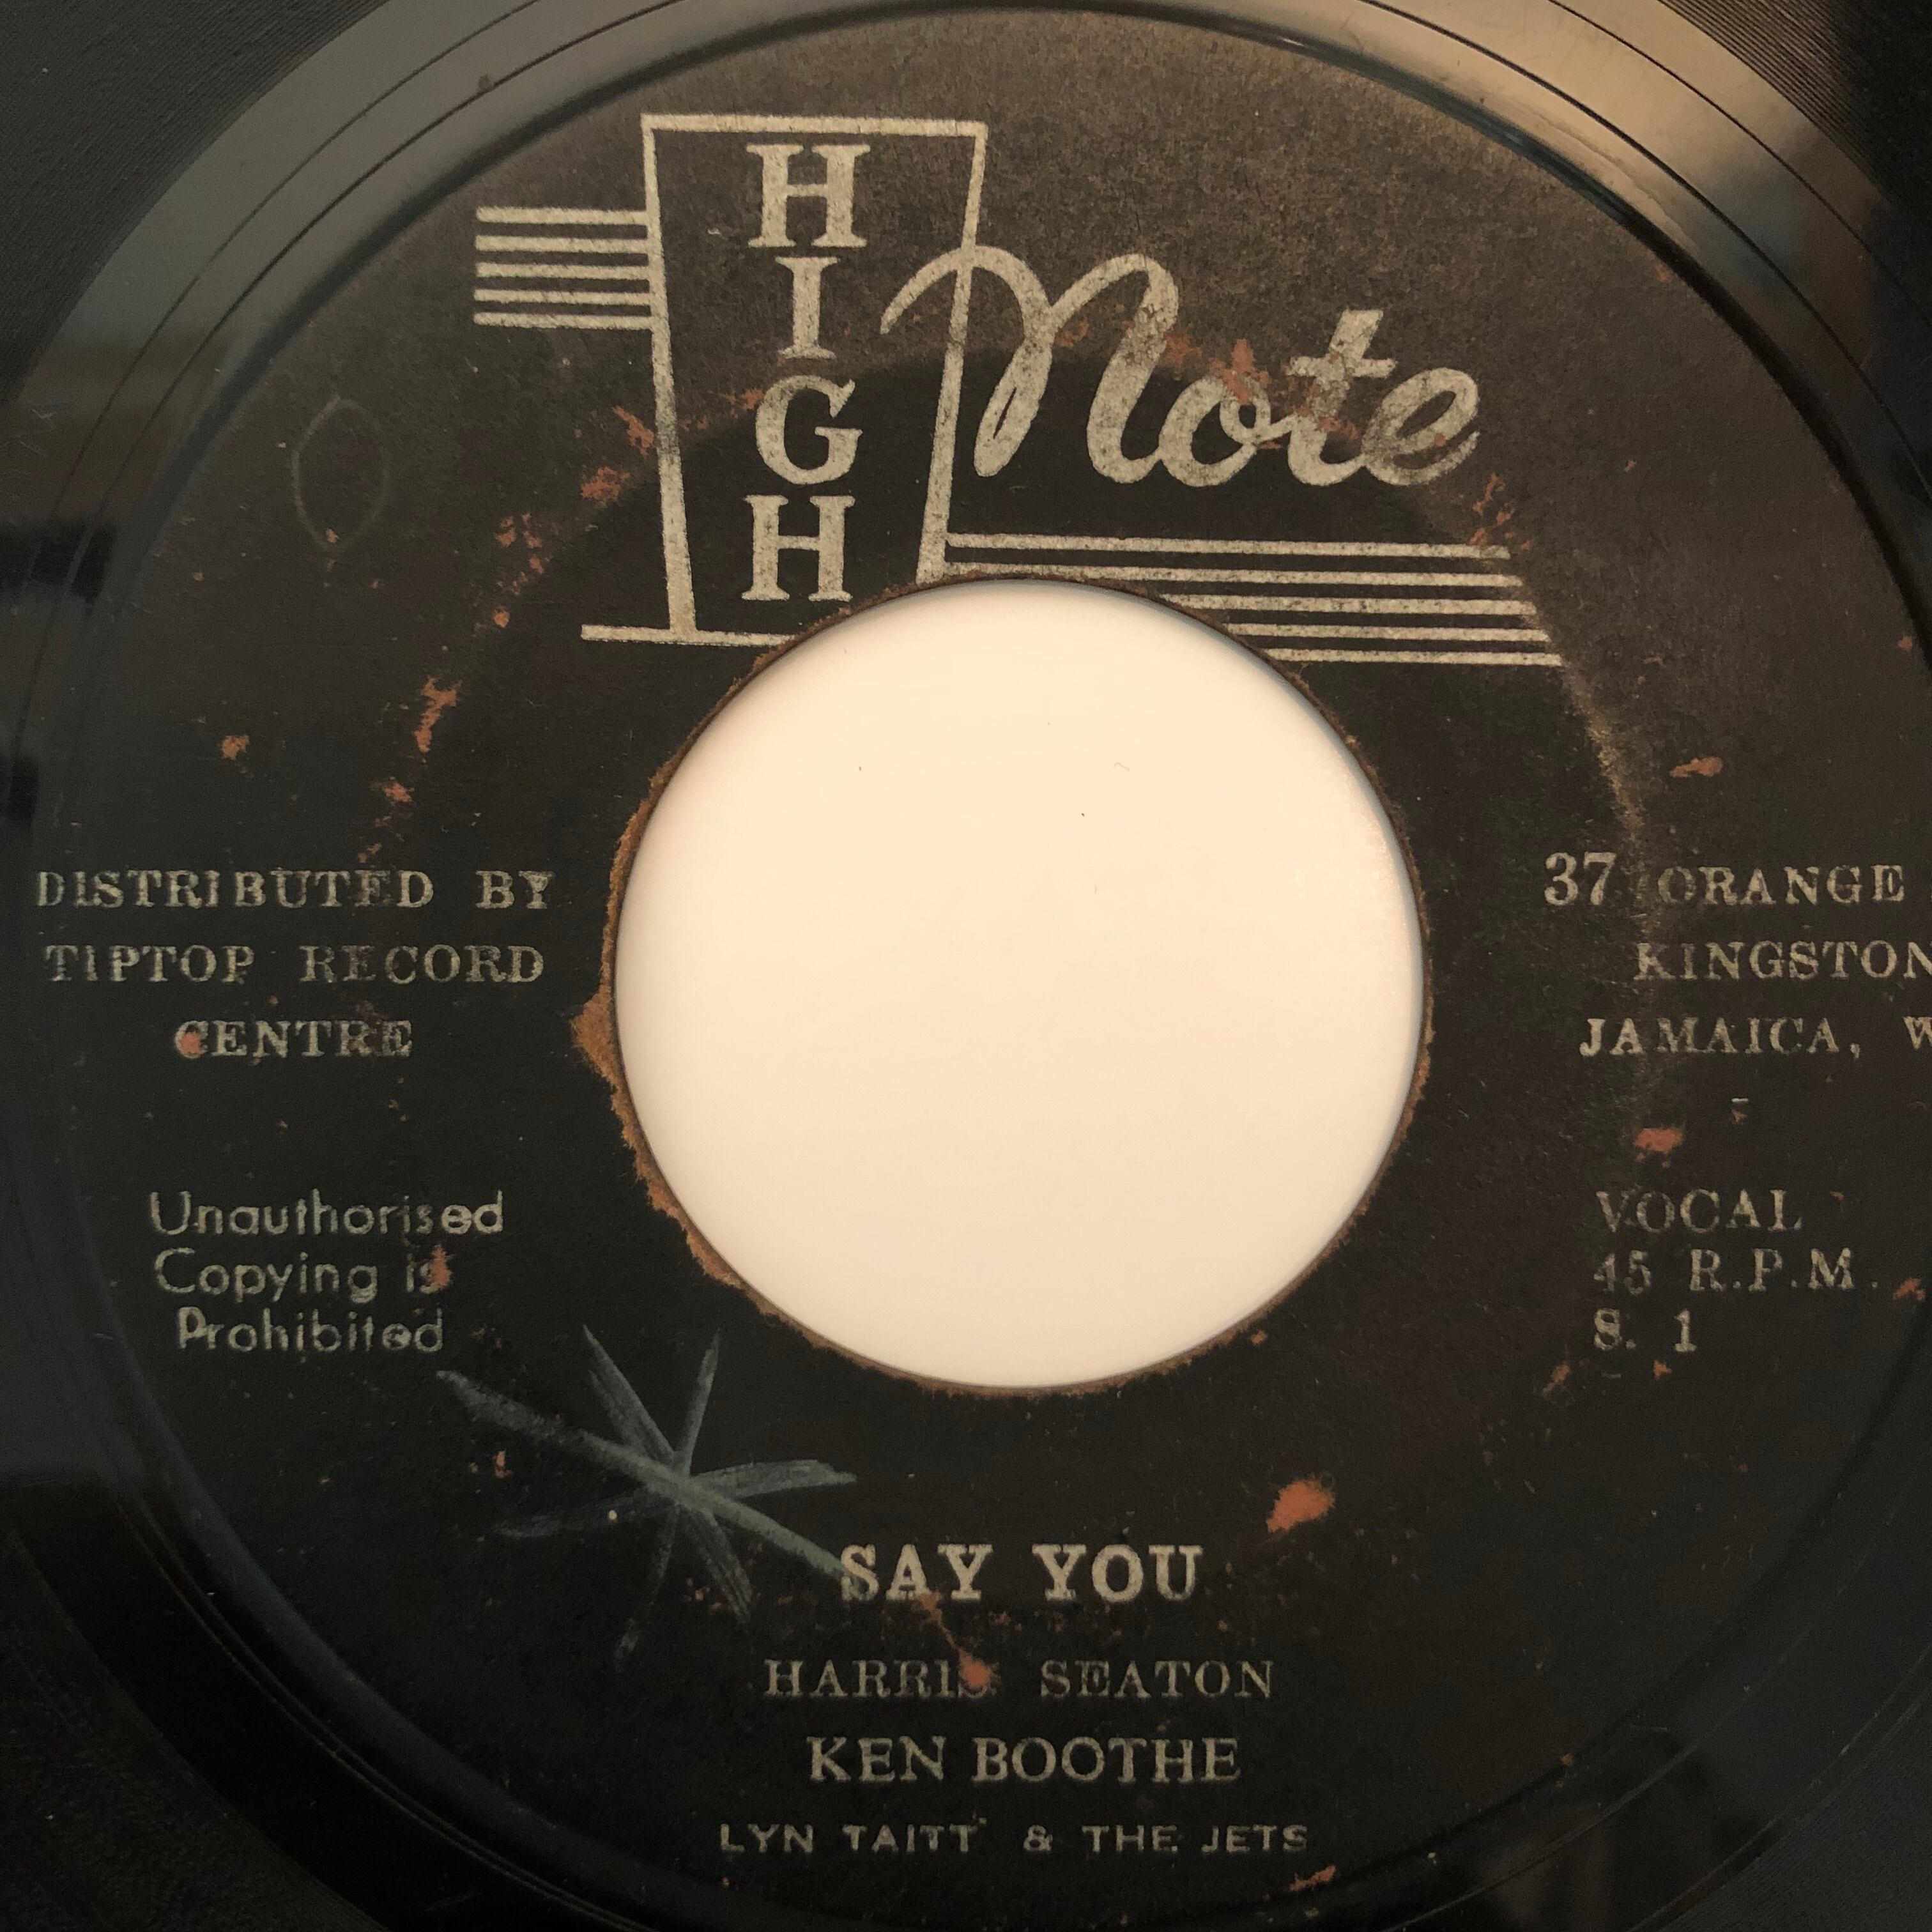 Ken Boothe, Lyn Taitt & The Jets - Say You【7-20287】